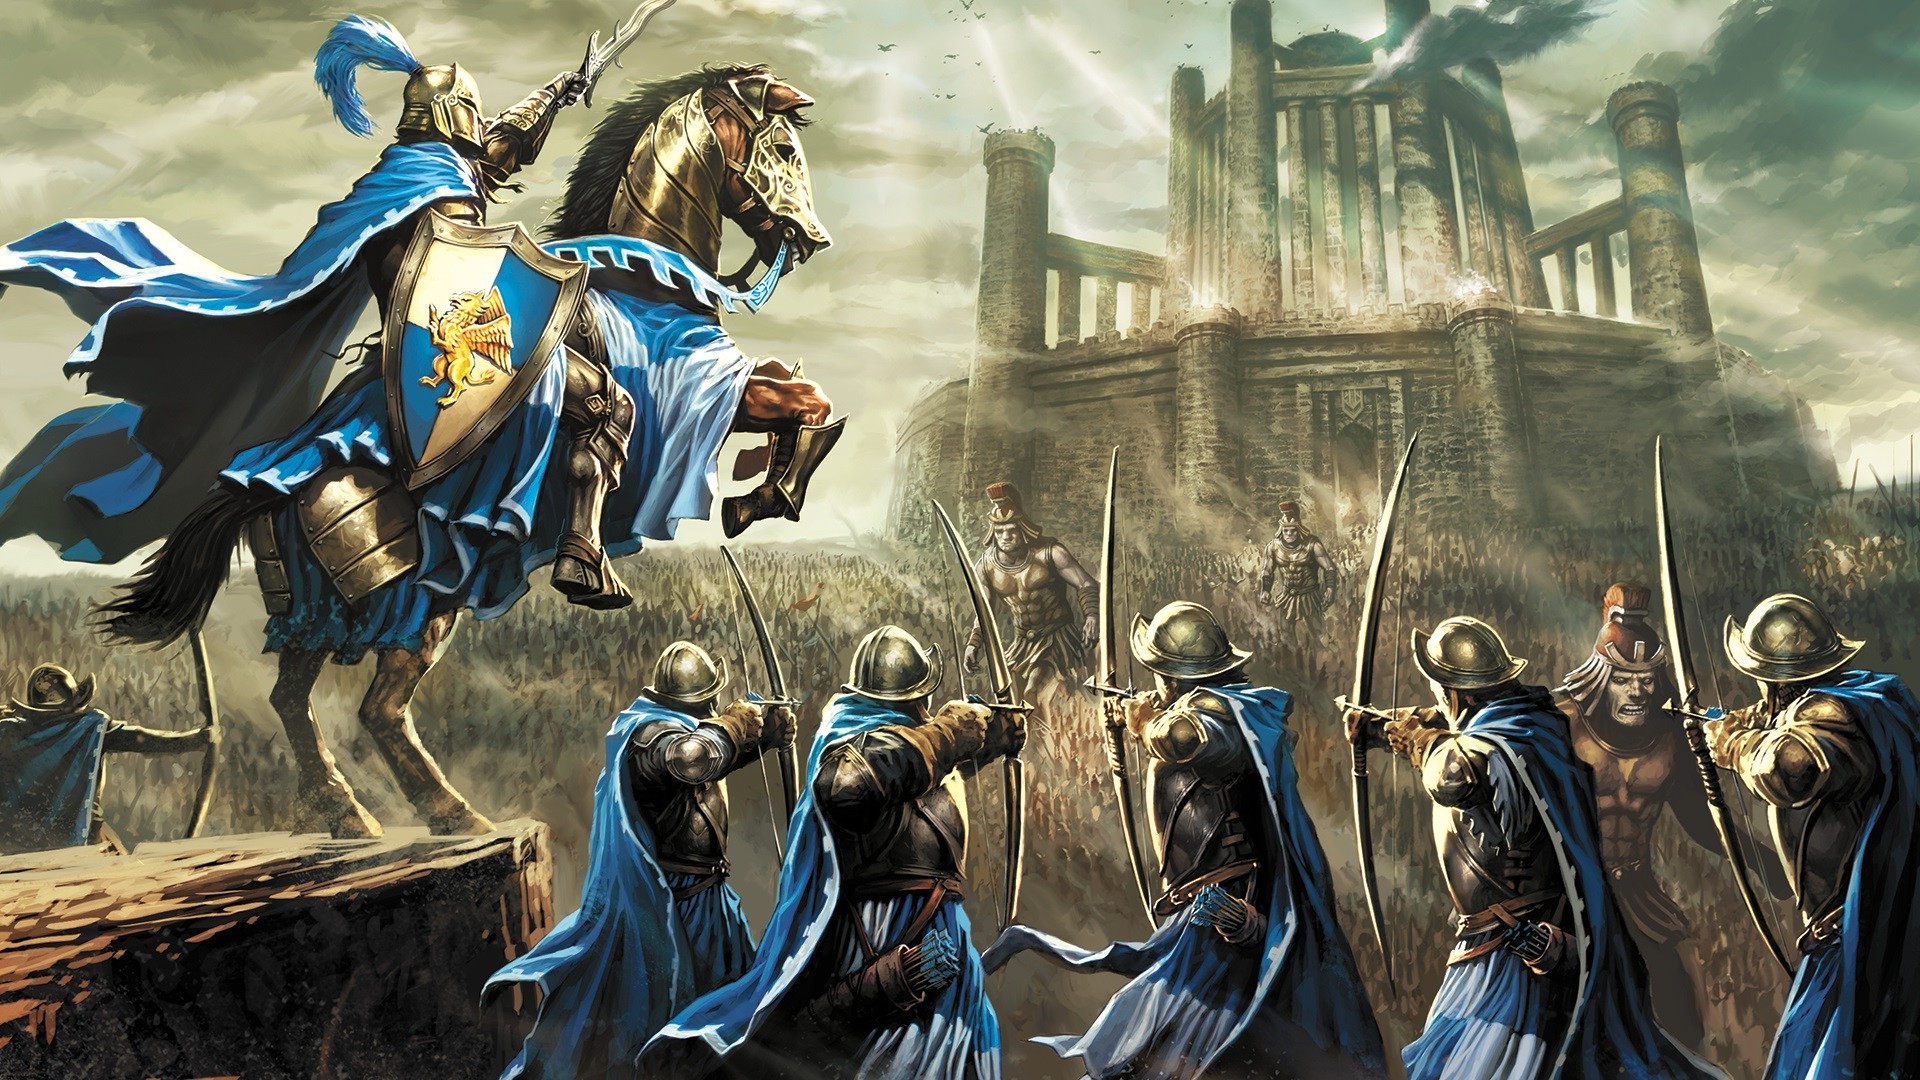 artwork, Fantasy Art, Heroes Of Might And Magic, Heroes Of Might And Magic III, Video Games, Horse, War, Archer, Archers, Knight, Knights Wallpaper